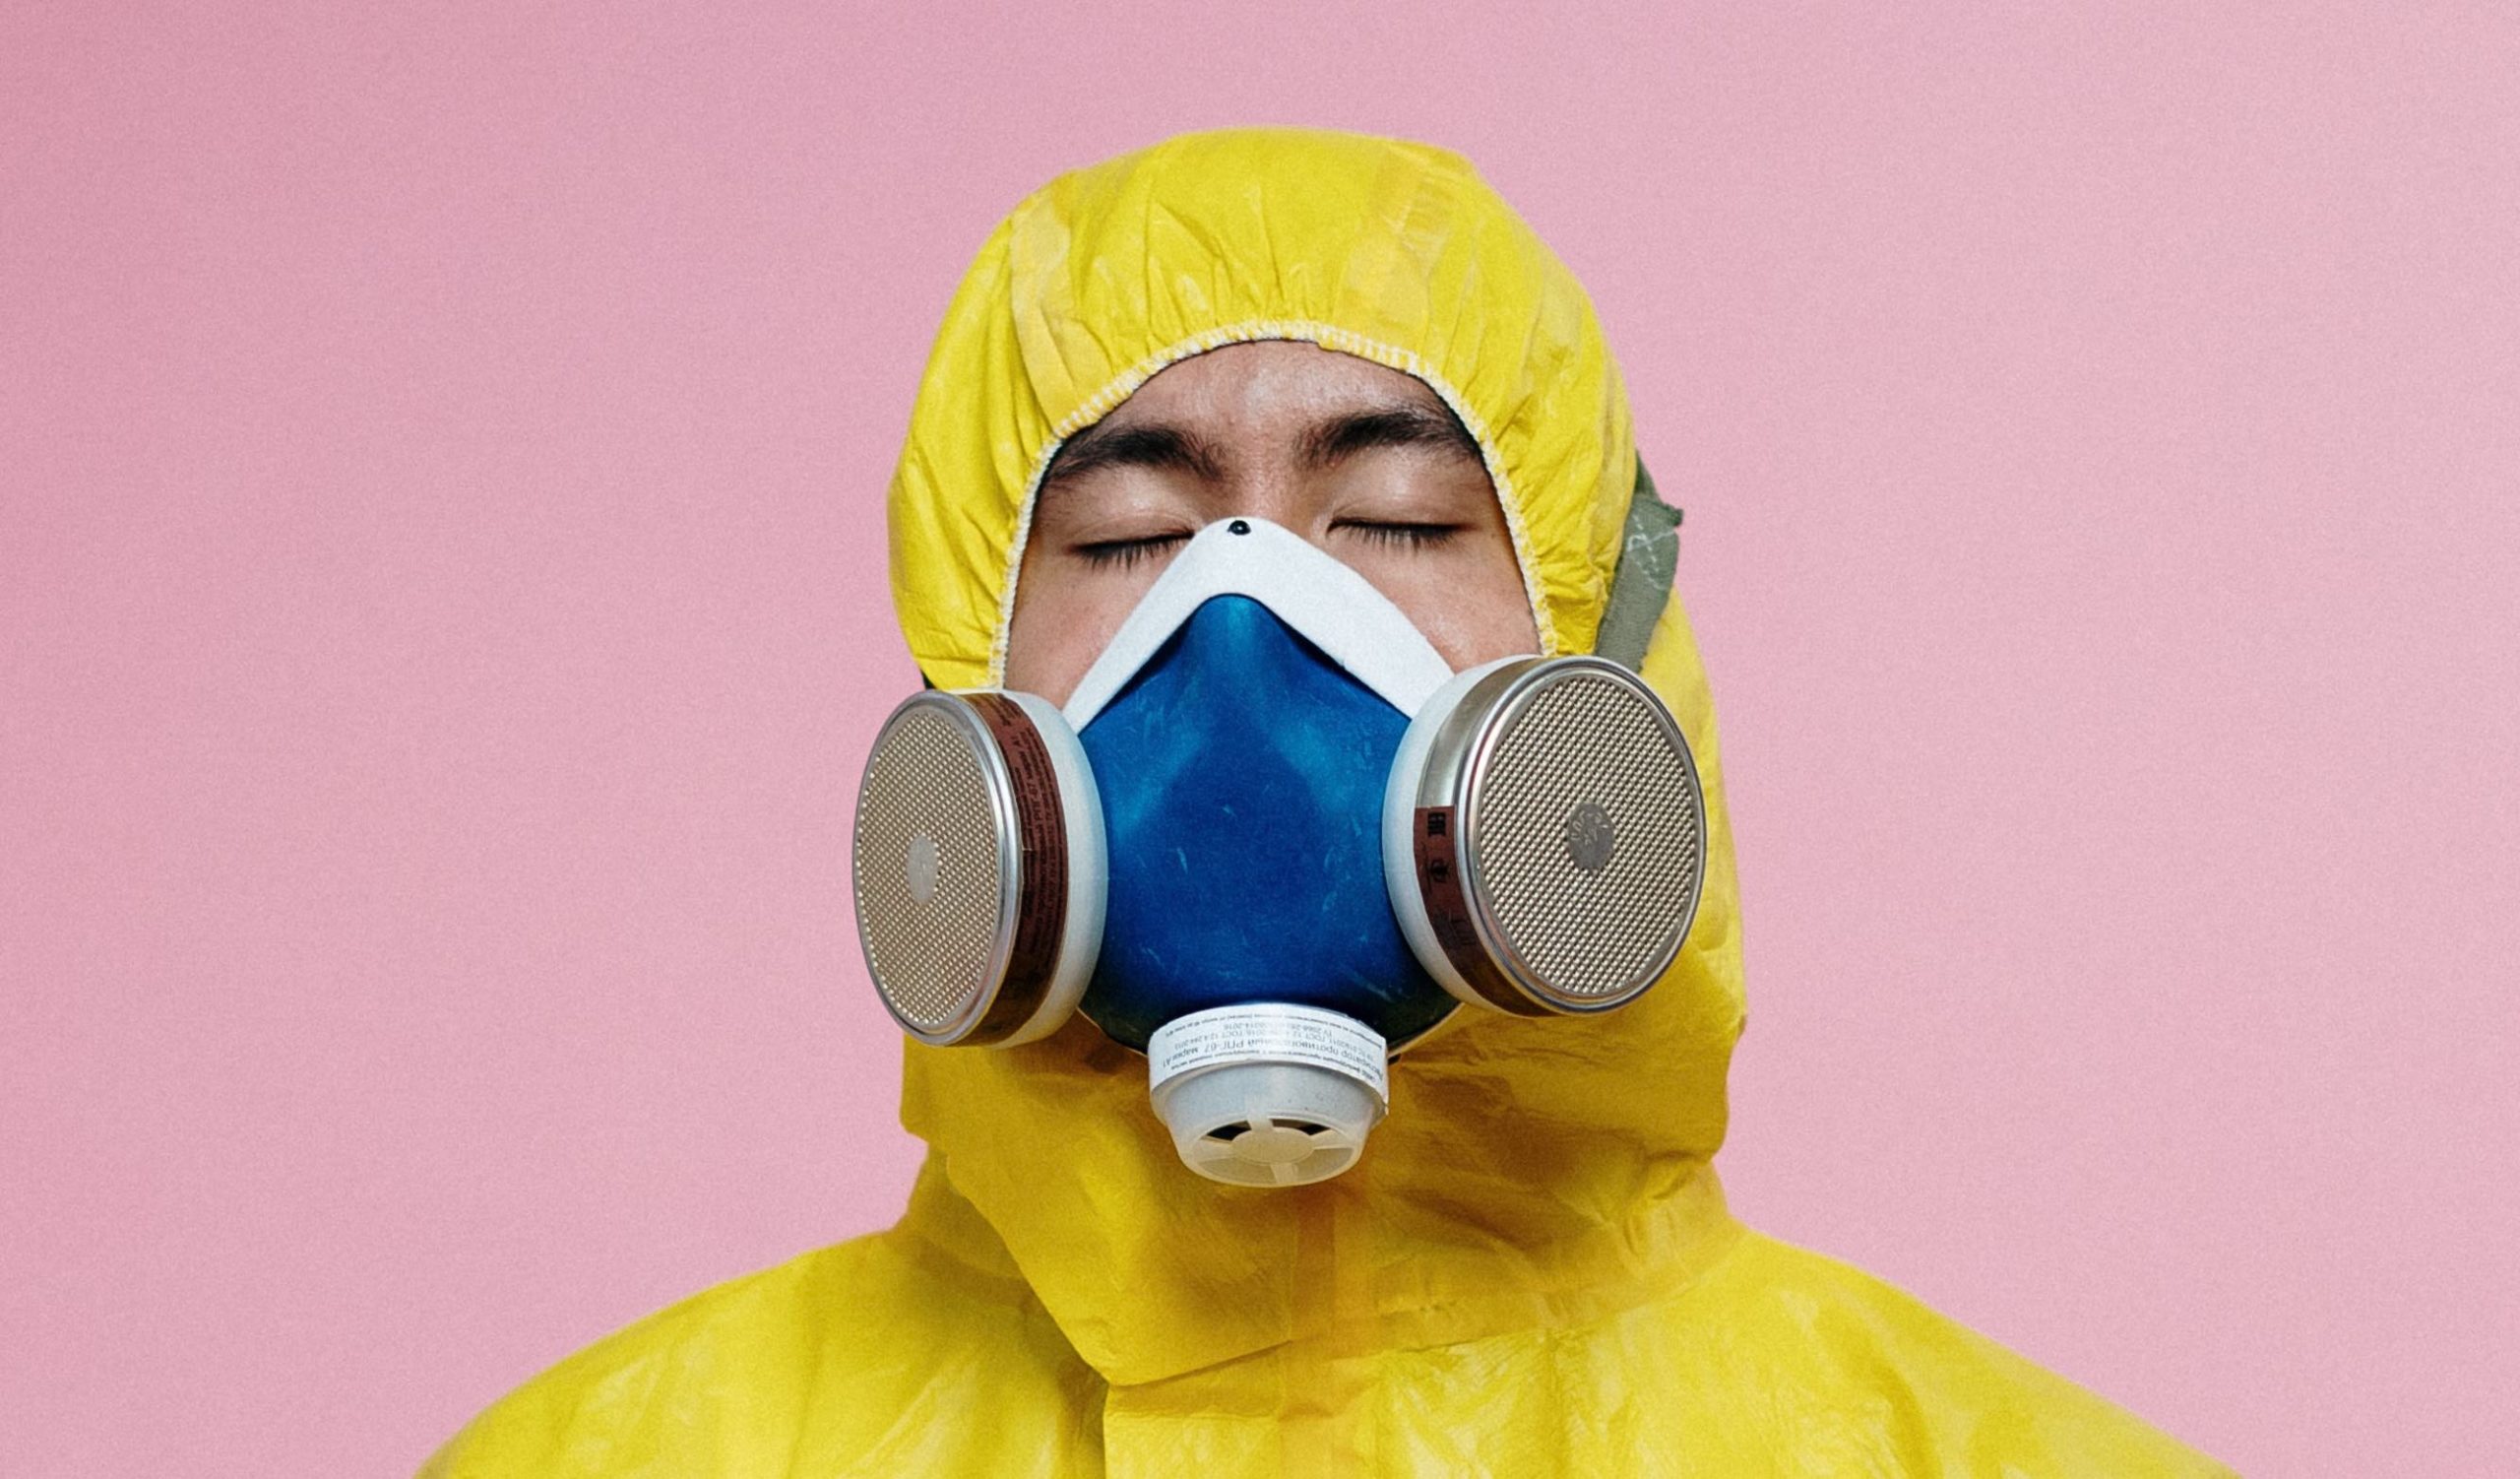 a person wearing a yellow raincoat and a gas mask